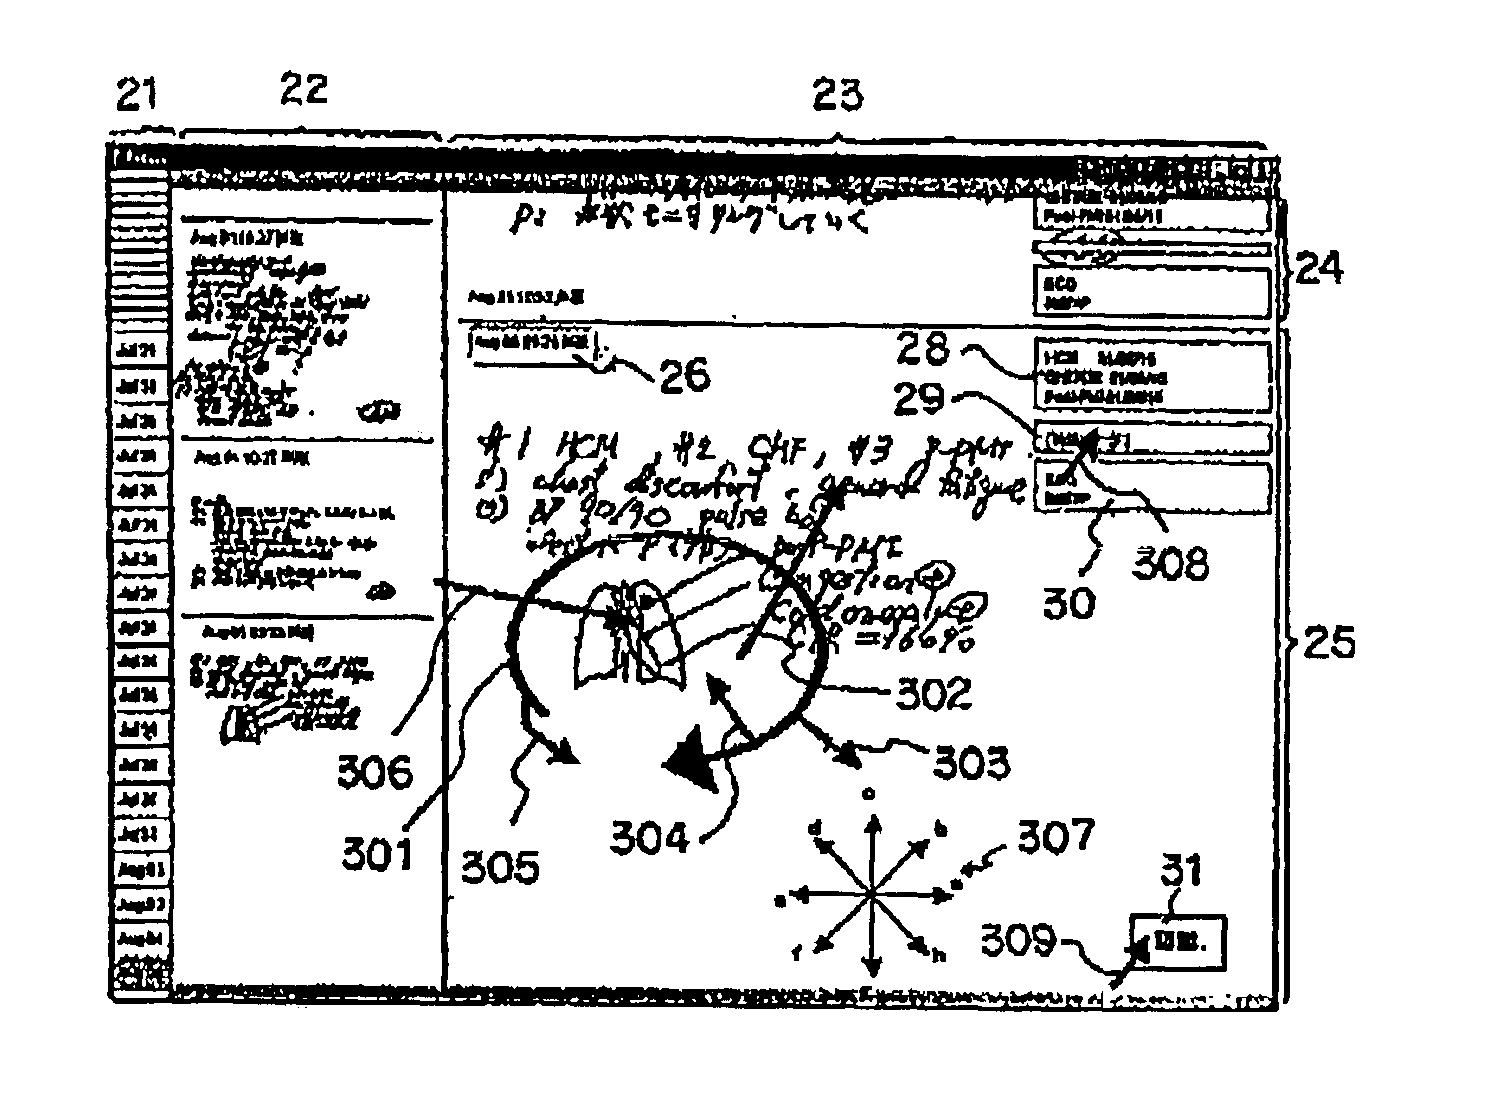 Electronic record system and control program device with display and tablet function for manipulating display area functions with pen stylus